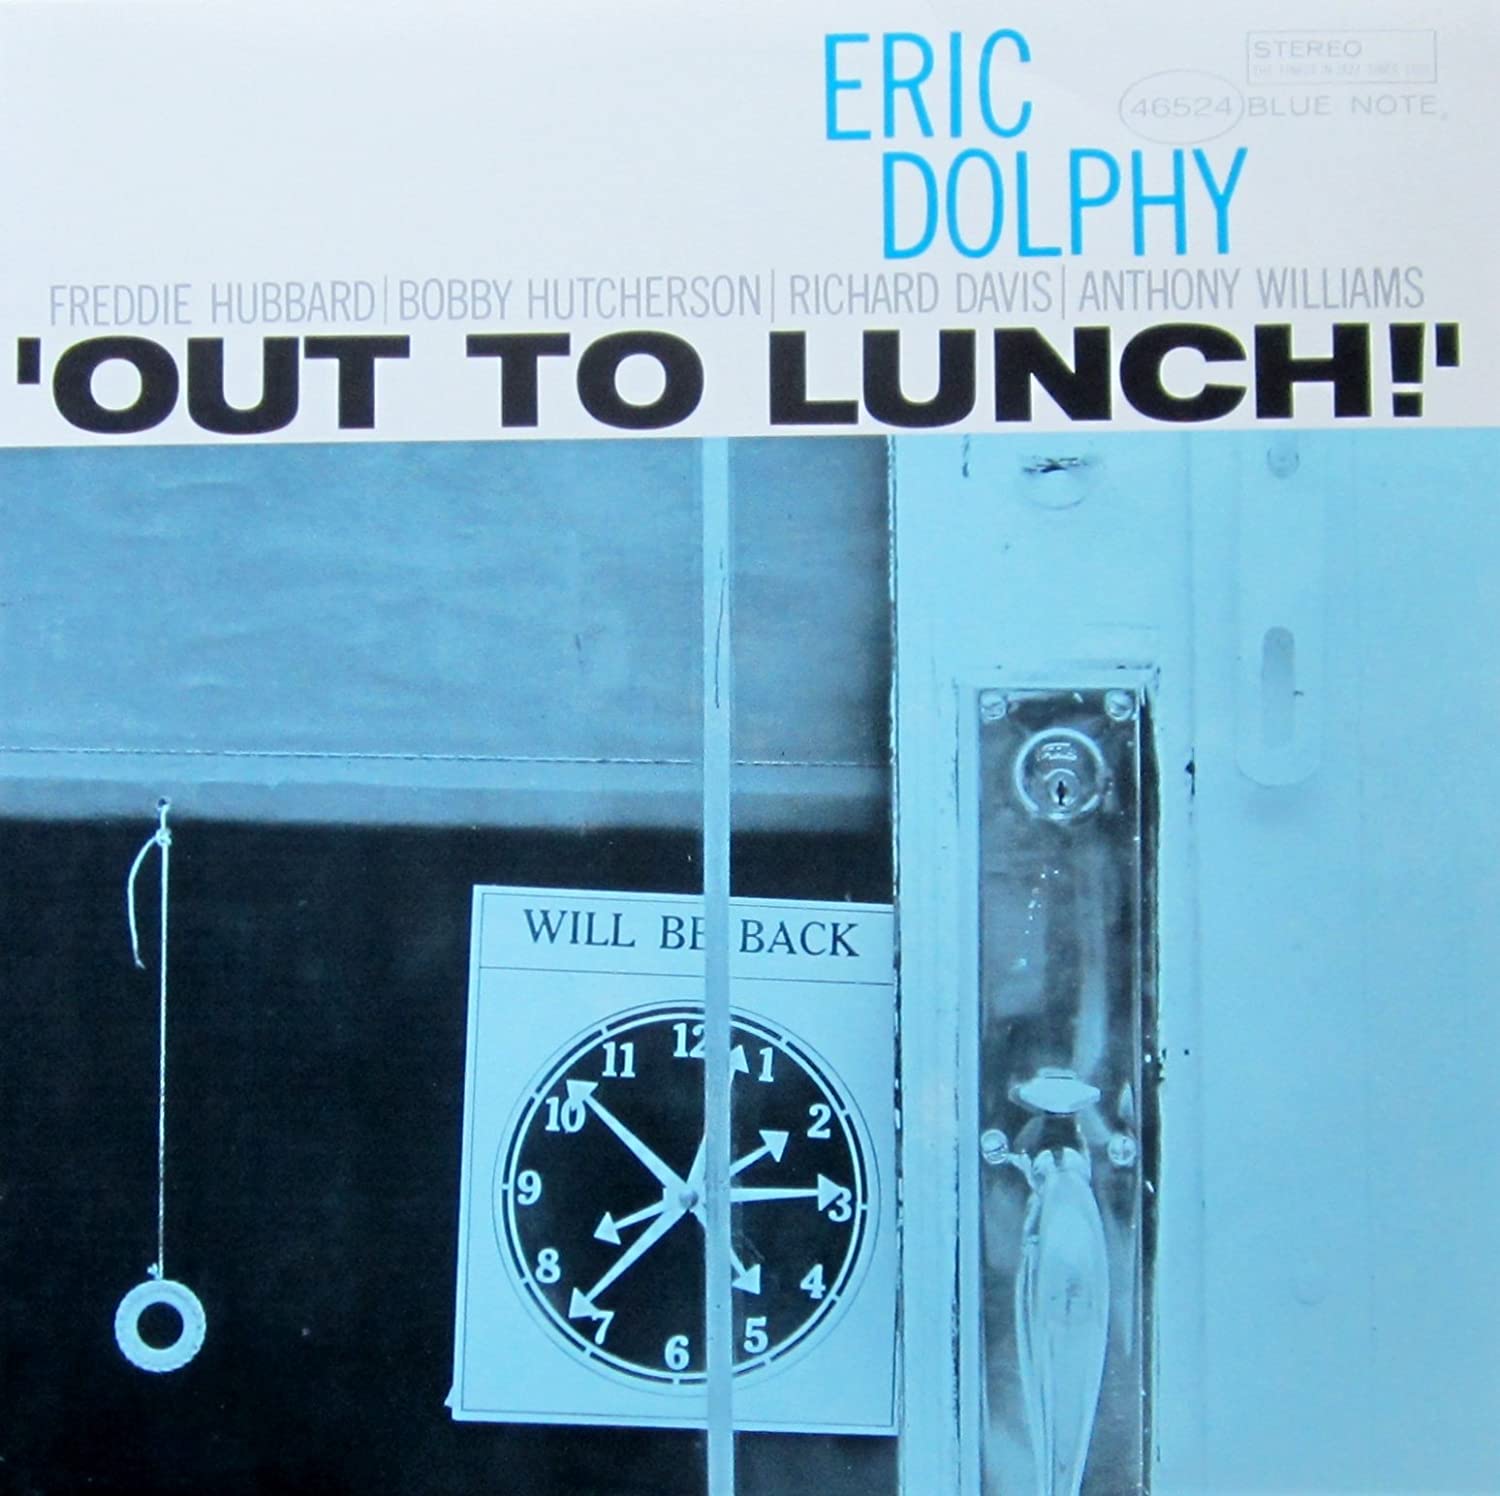 ERIC DOLPHY-'OUT TO LUNCH!'